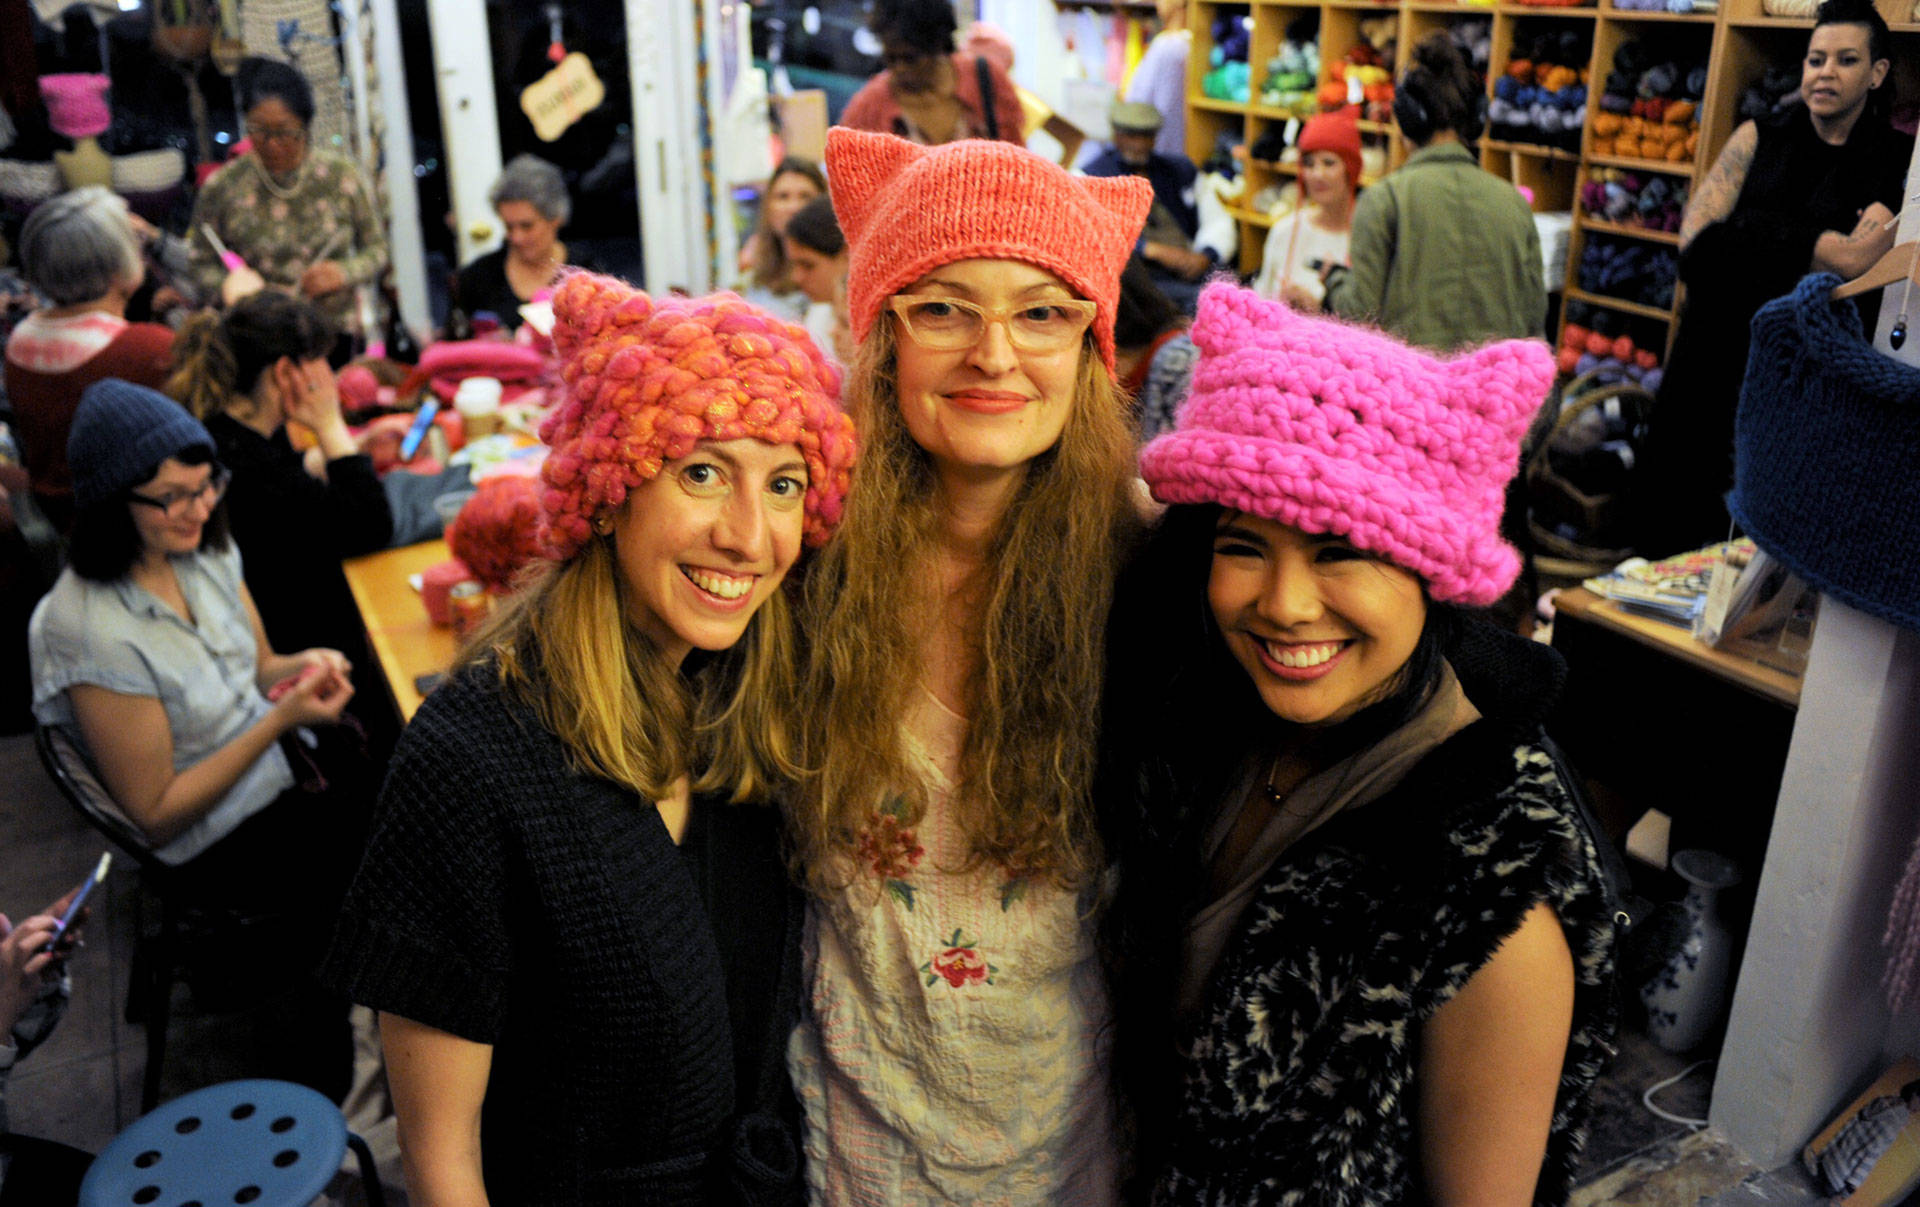 Pussyhat Project co-founder Jayna Zweiman (L), The Little Knittery owner Kat Coyle (C), and Pussyhat Project co-founder Krista Suh (R) at The Little Knittery in Los Angeles. Blair Wells/KQED